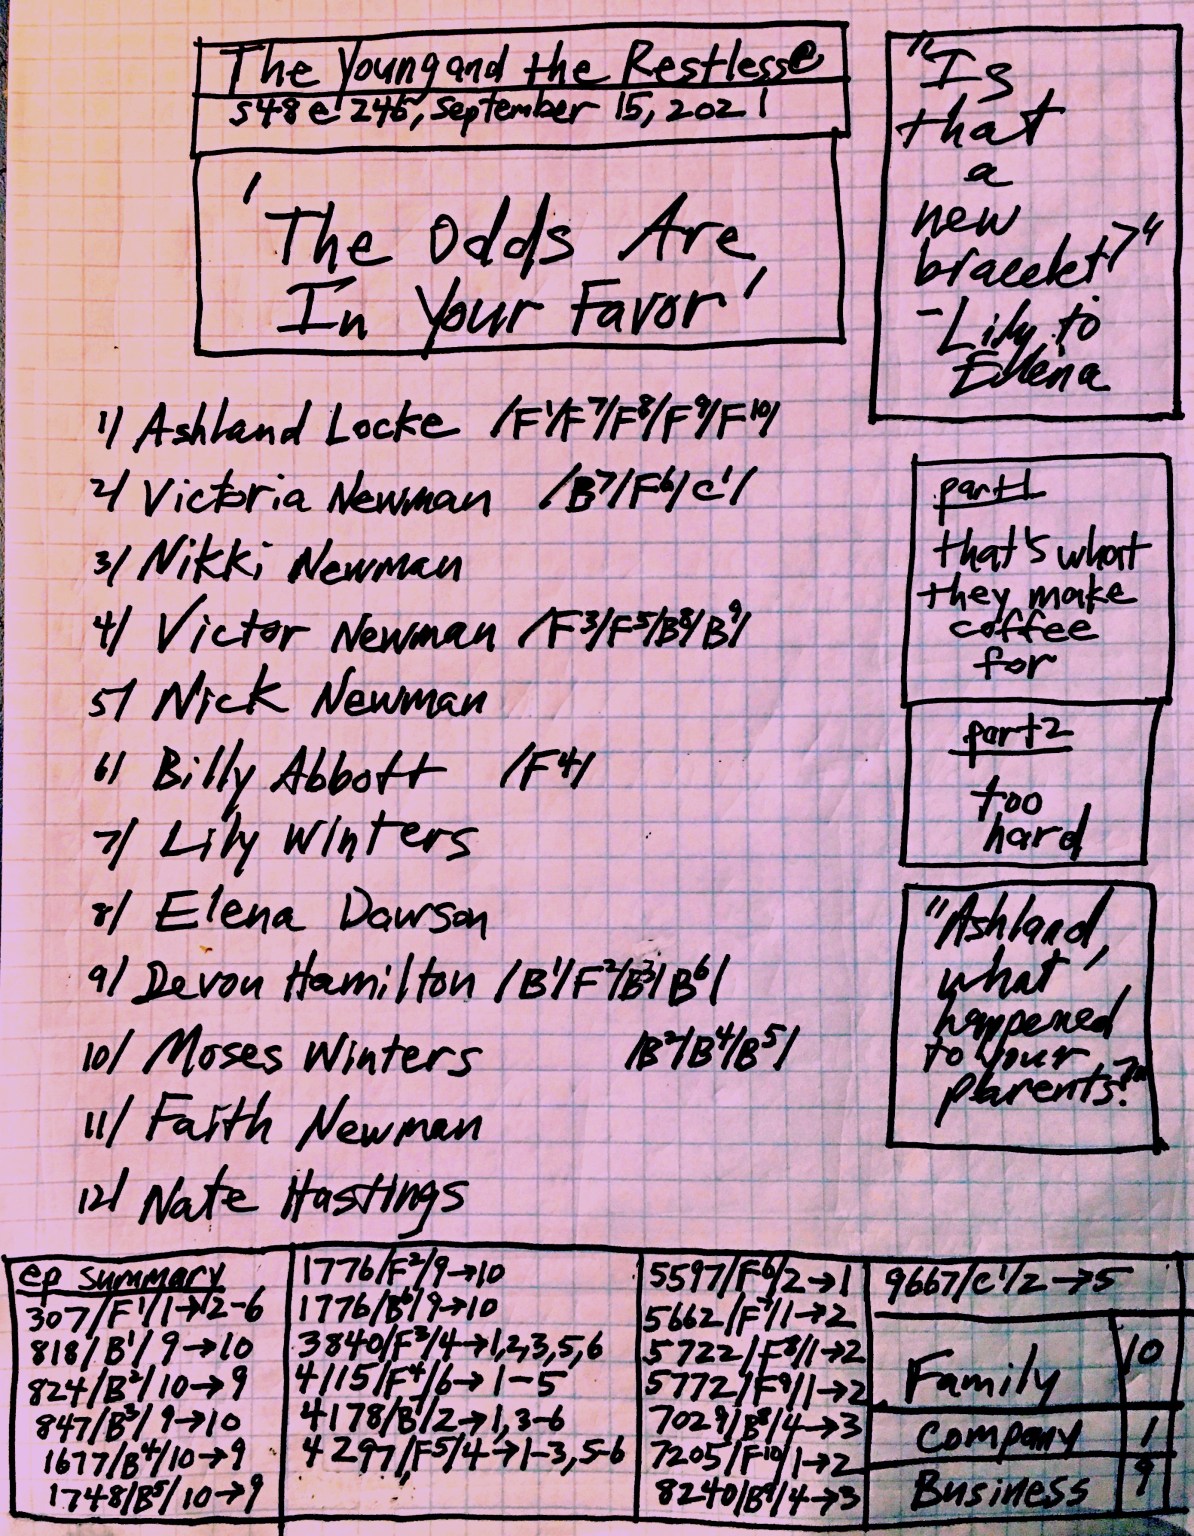 notes on American drama as shown in tv